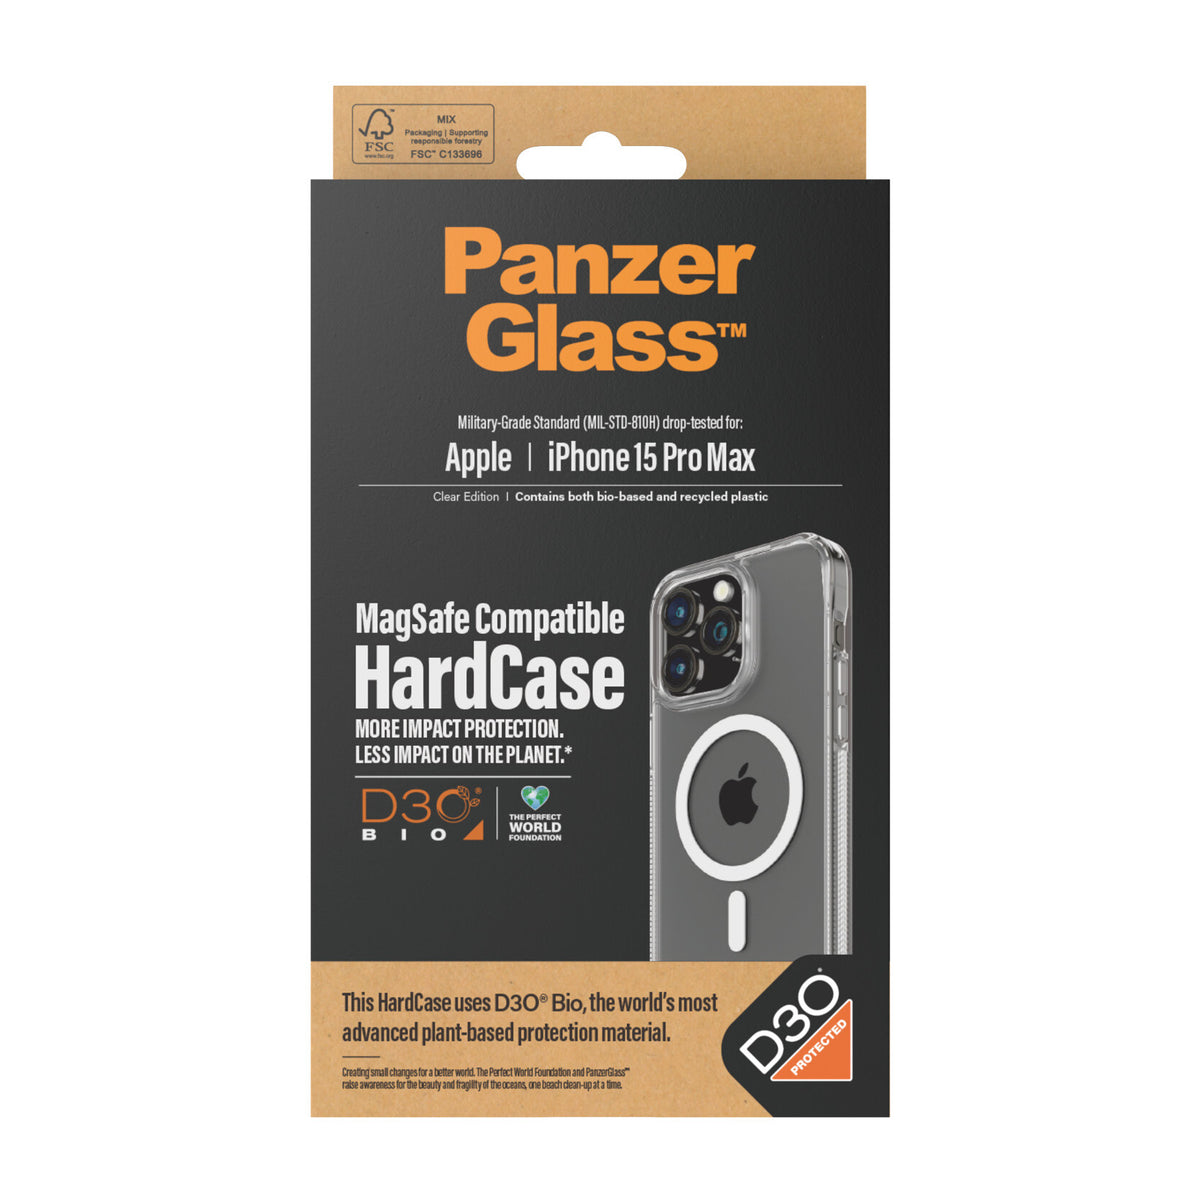 PanzerGlass ® HardCase MagSafe with D3O for iPhone 15 Pro Max in Transparent